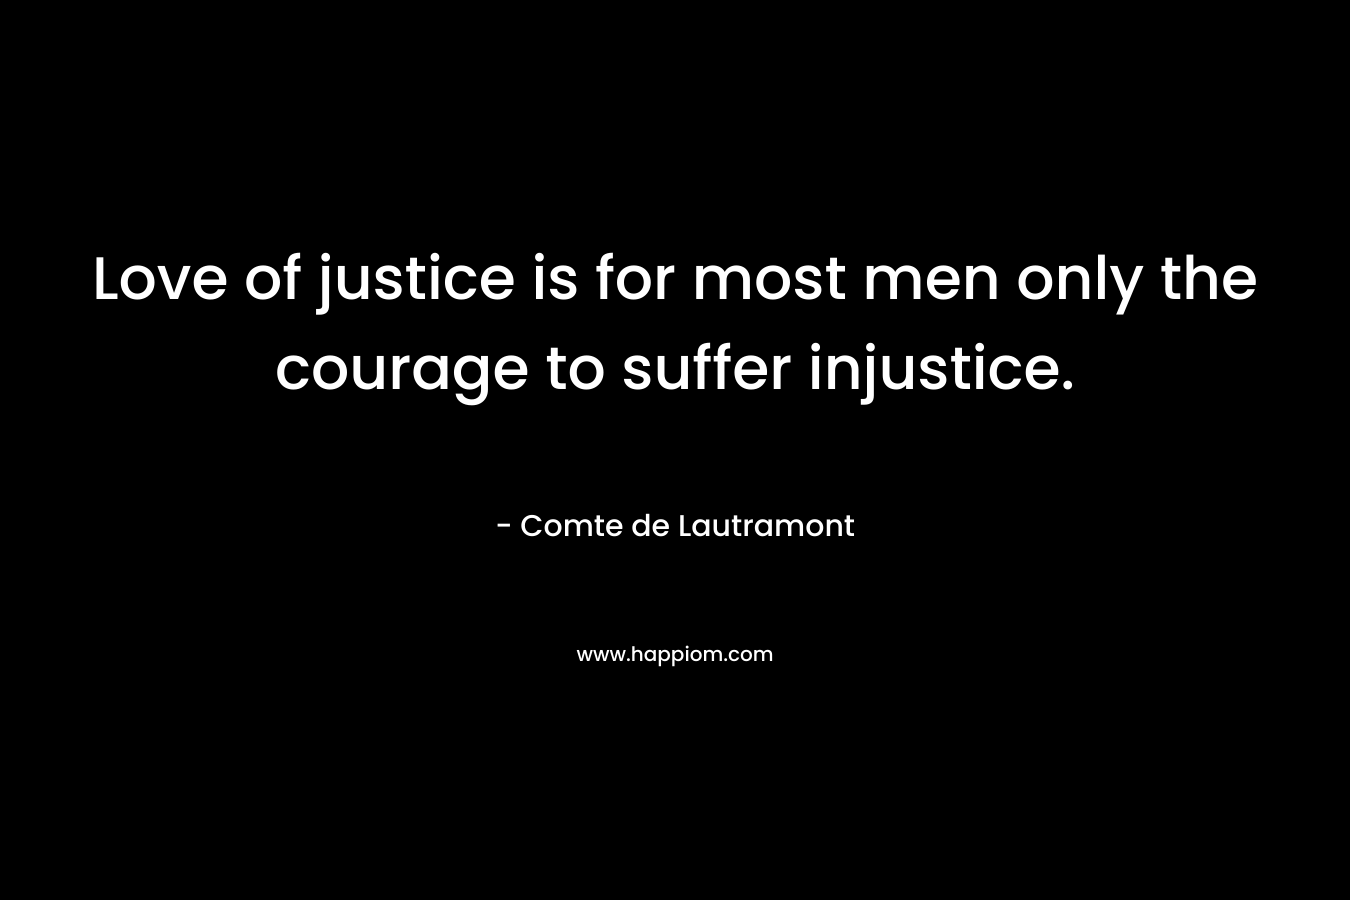 Love of justice is for most men only the courage to suffer injustice.